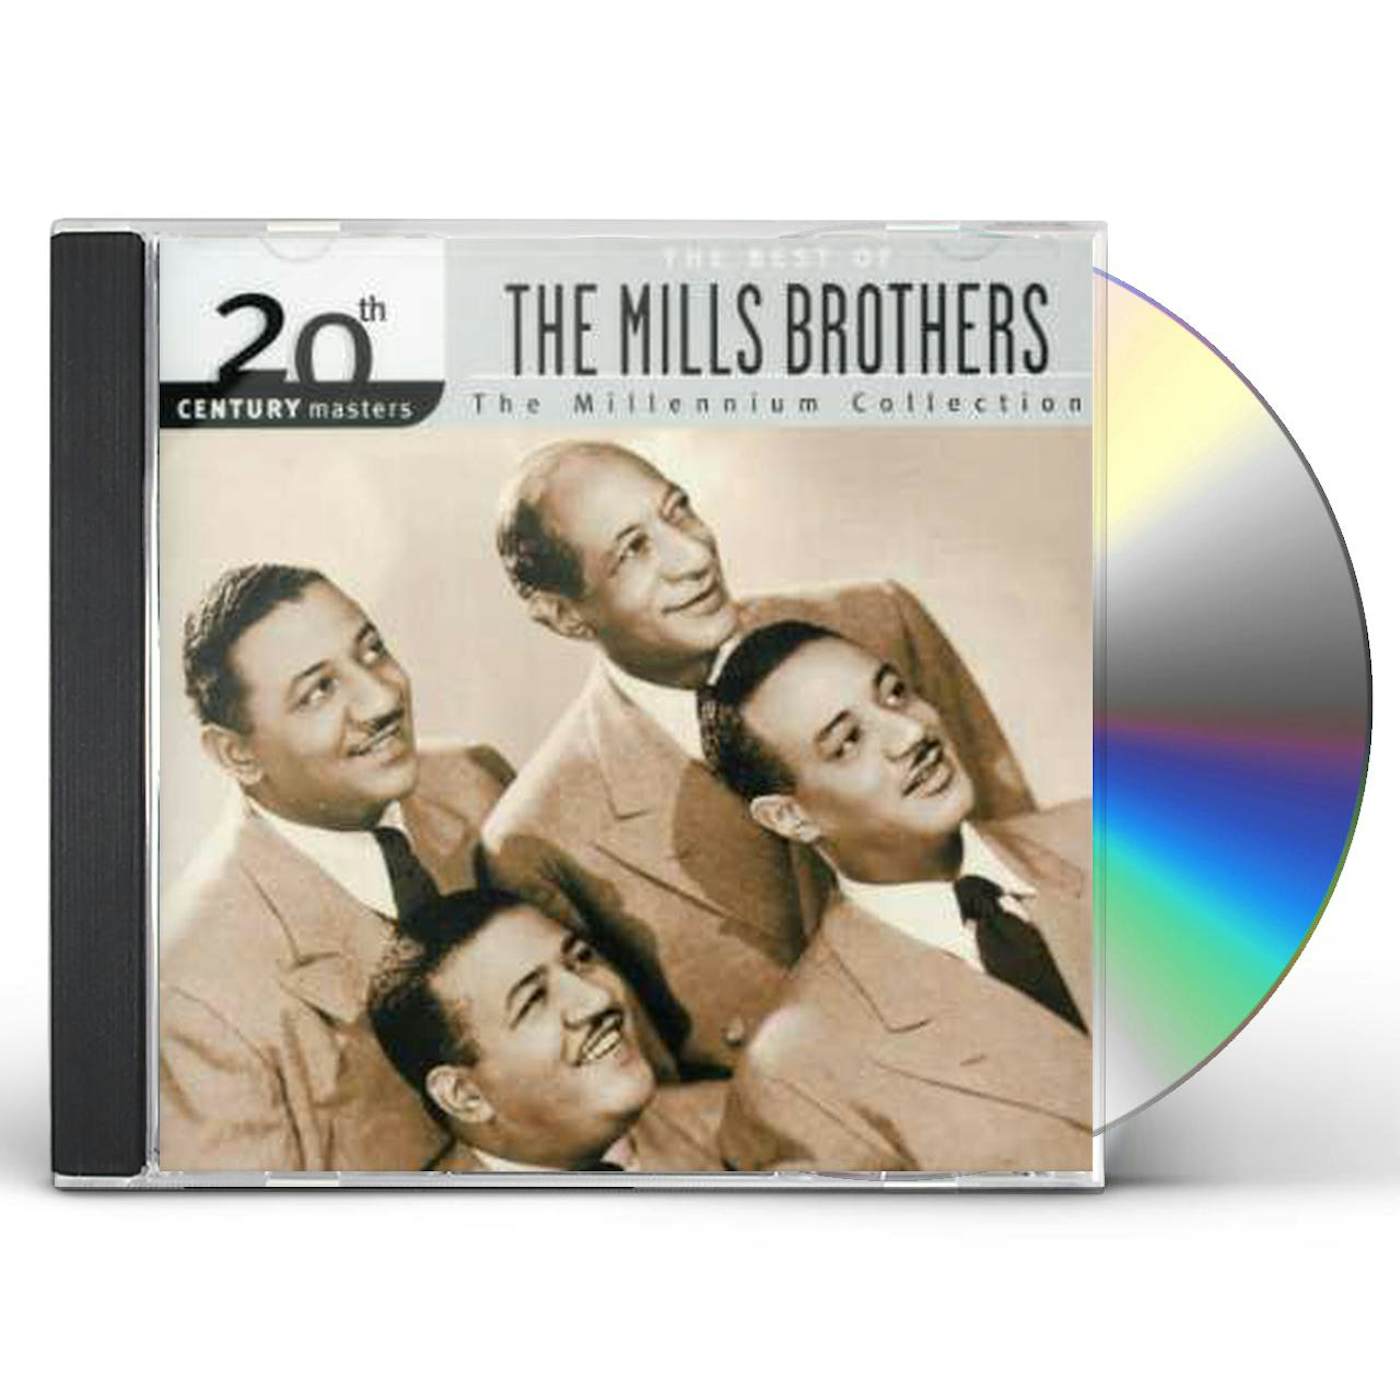 The Mills Brothers 20TH CENTURY MASTERS CD